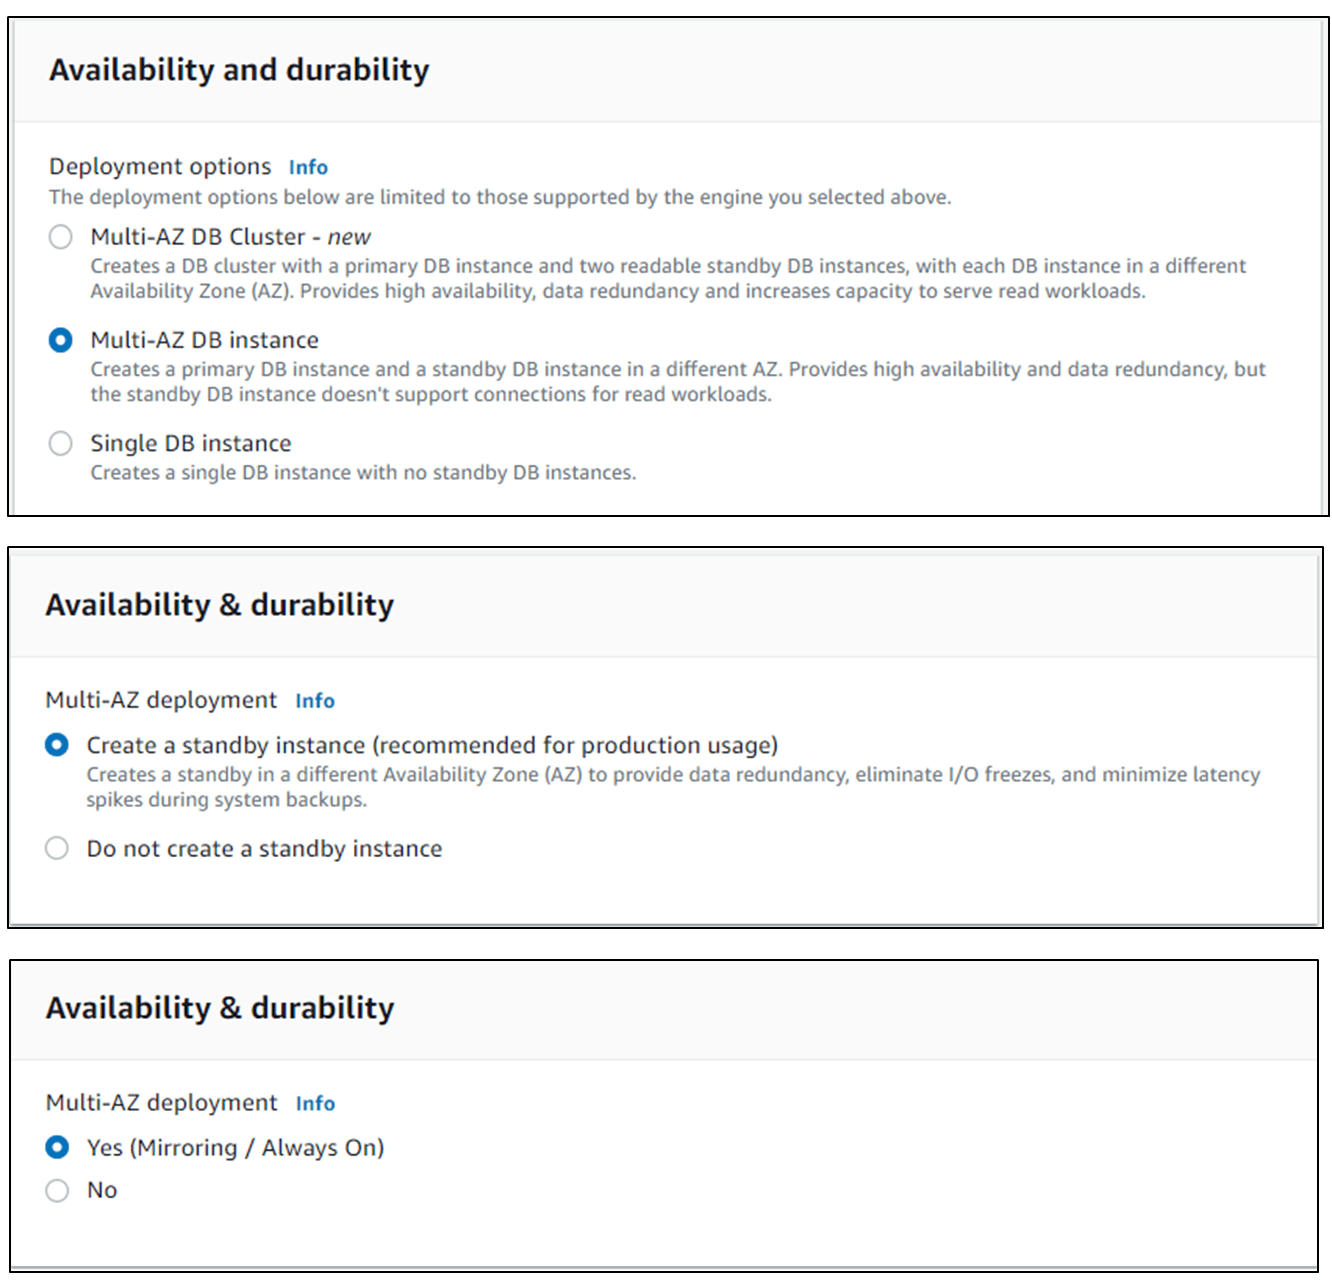 Availability and durability options for Amazon RDS